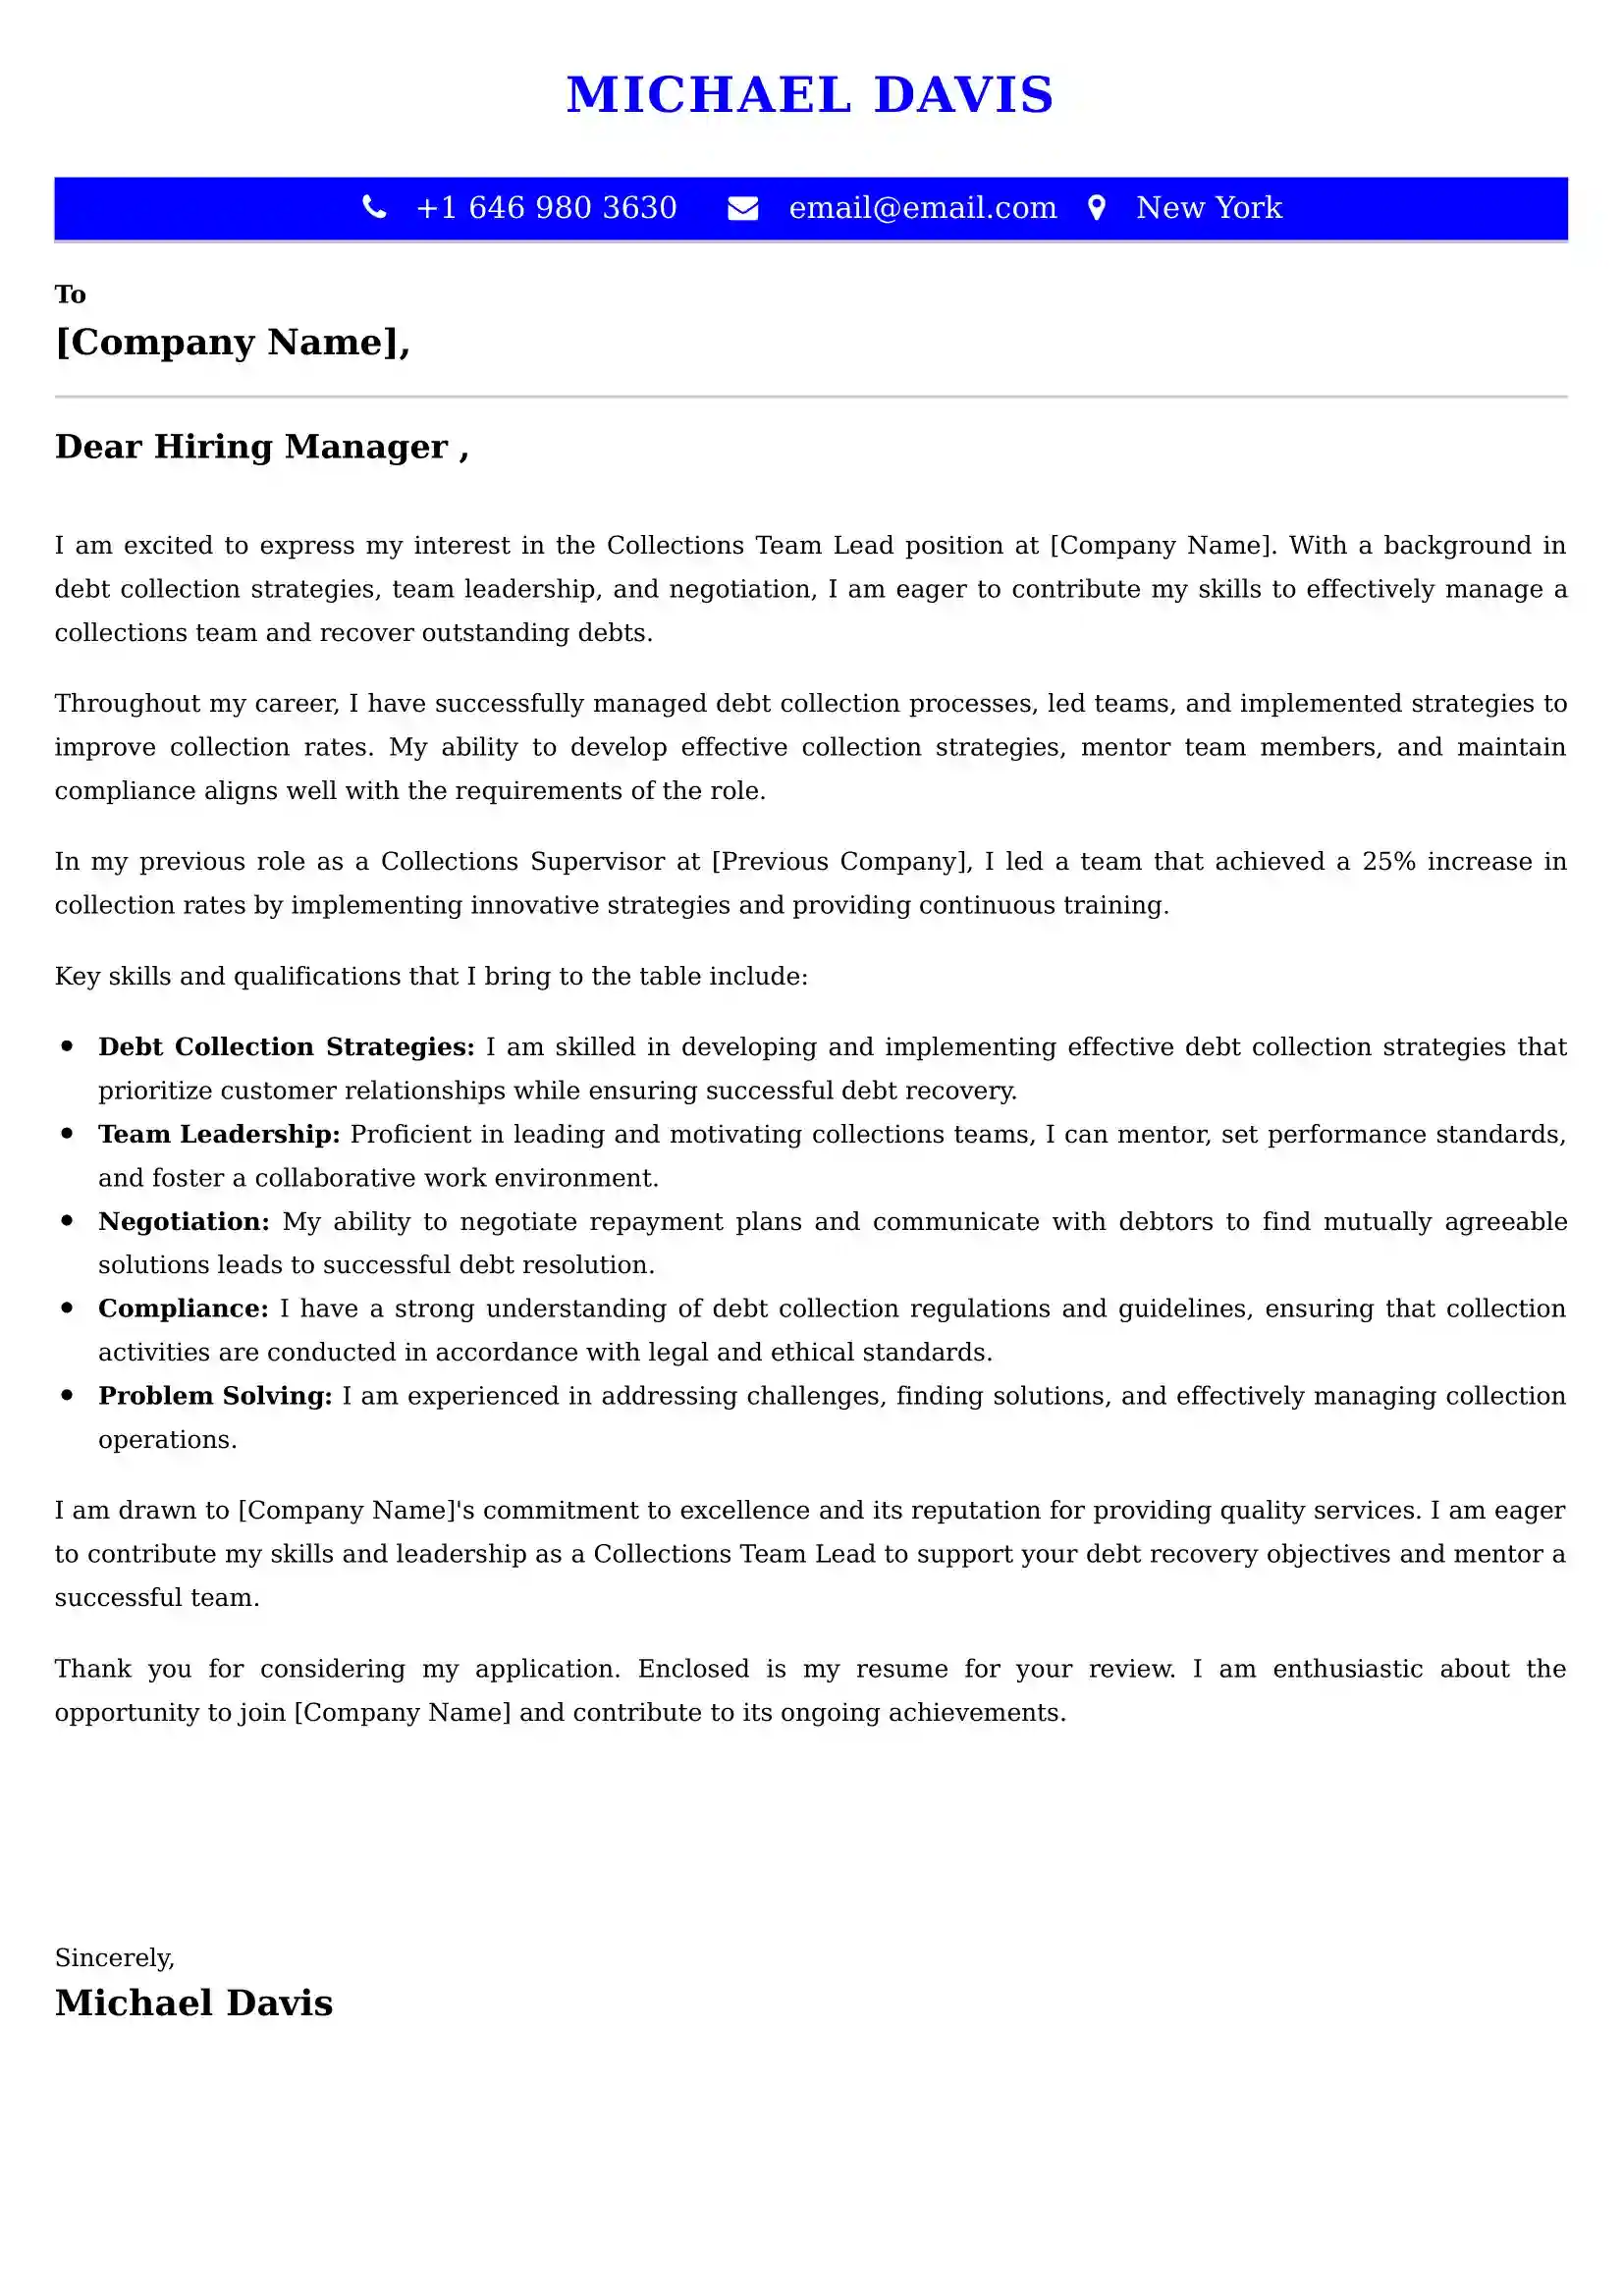 Collections Team Lead Cover Letter Examples - US Format and Tips